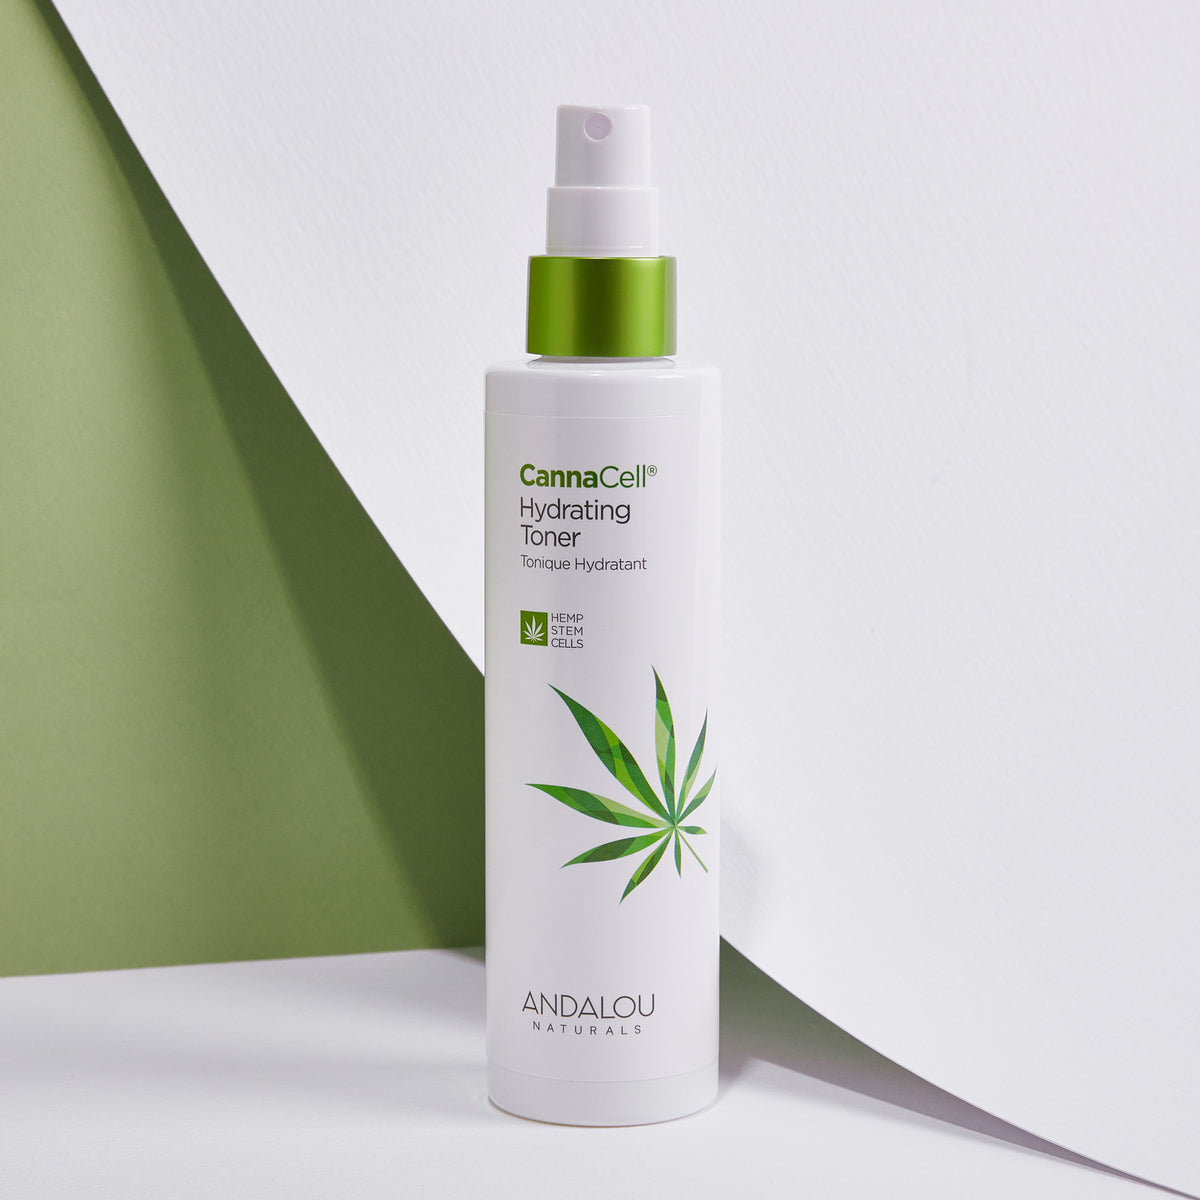 A bottle of CannaCell Hydrating Toner from Andalou Naturals against a backdrop of white and green hues.